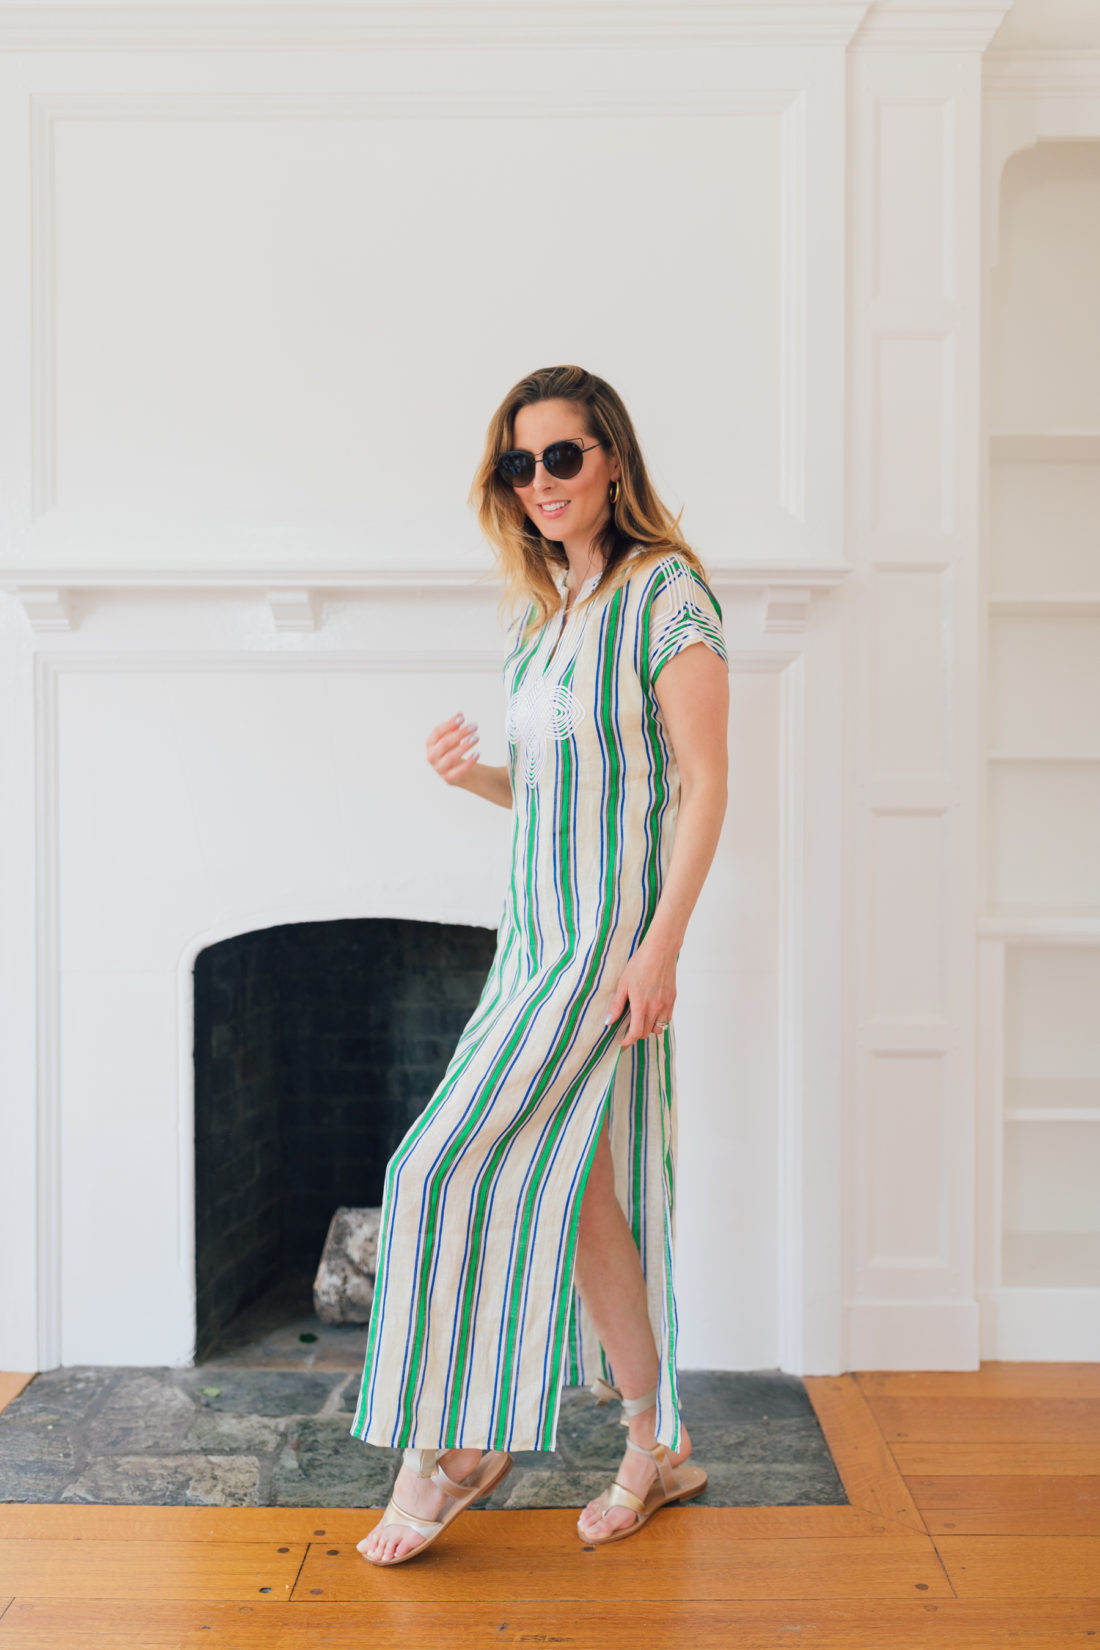 Eva Amurri Martino of Happily Eva After wears a green and white striped dress and shares her Jamaica packing list